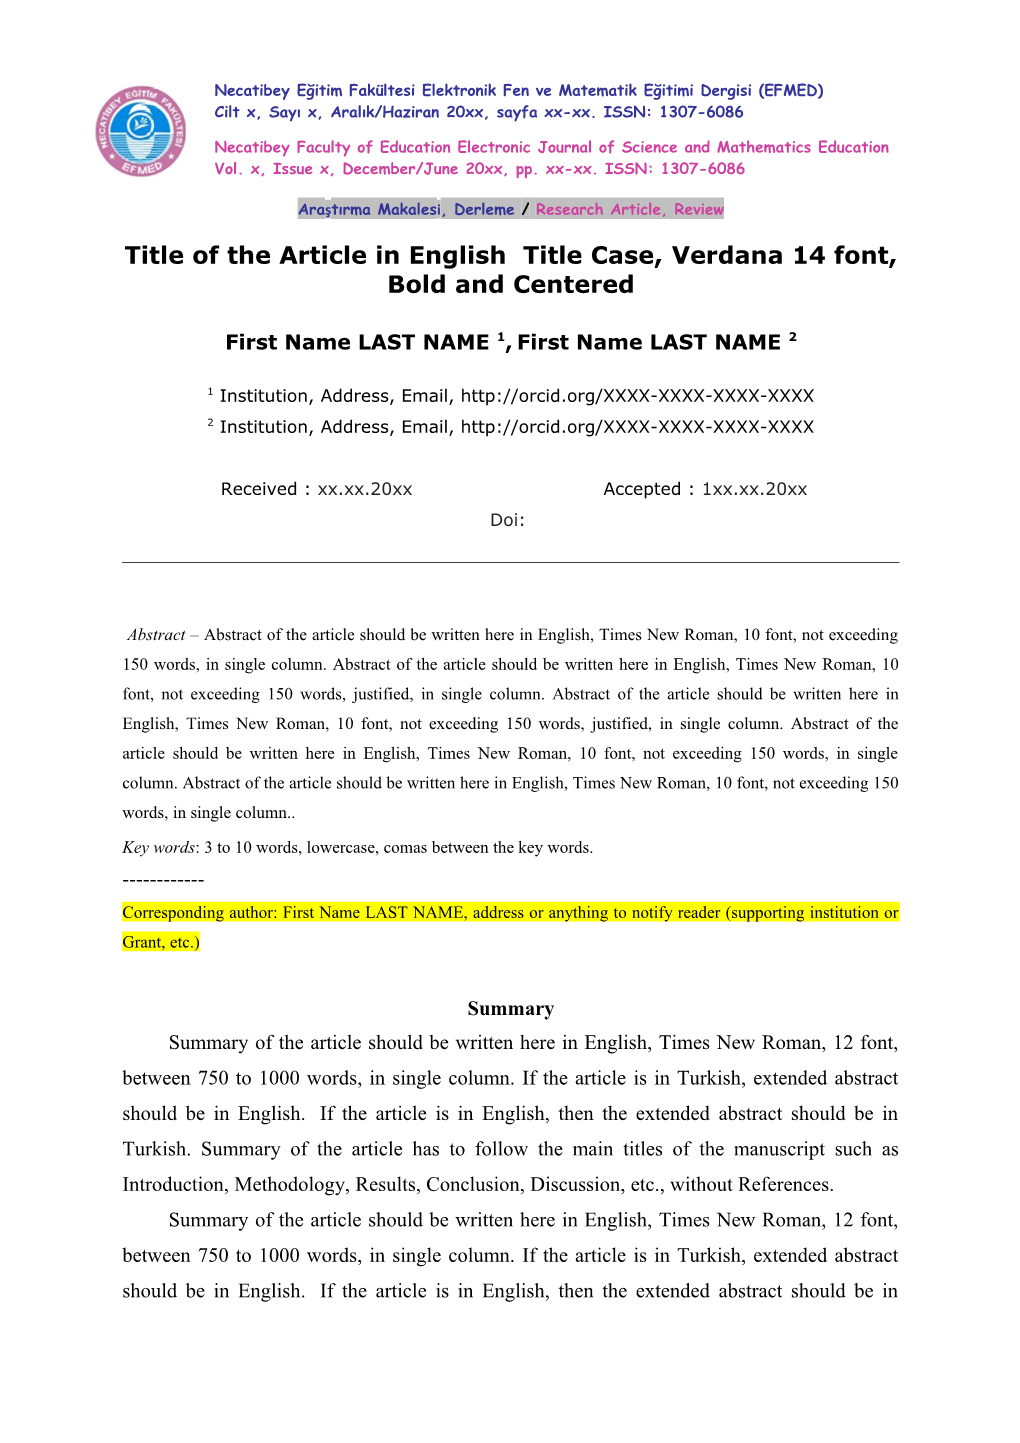 Title of the Article in English Title Case, Verdana 14 Font, Bold and Centered